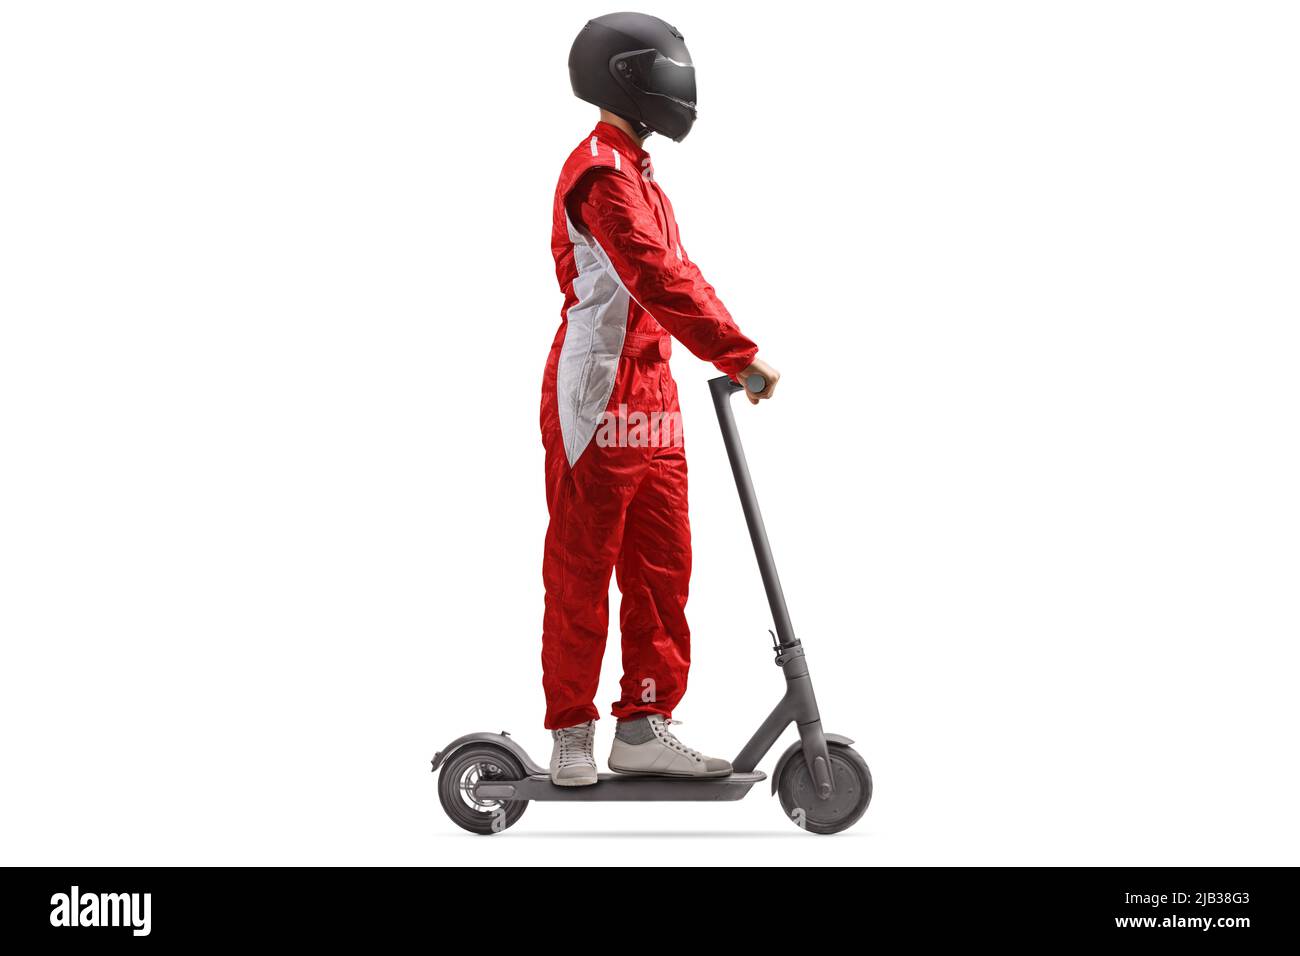 Full length profile shot of a racer in a red suit with a helmet riding an electric scooter isolated on white background Stock Photo